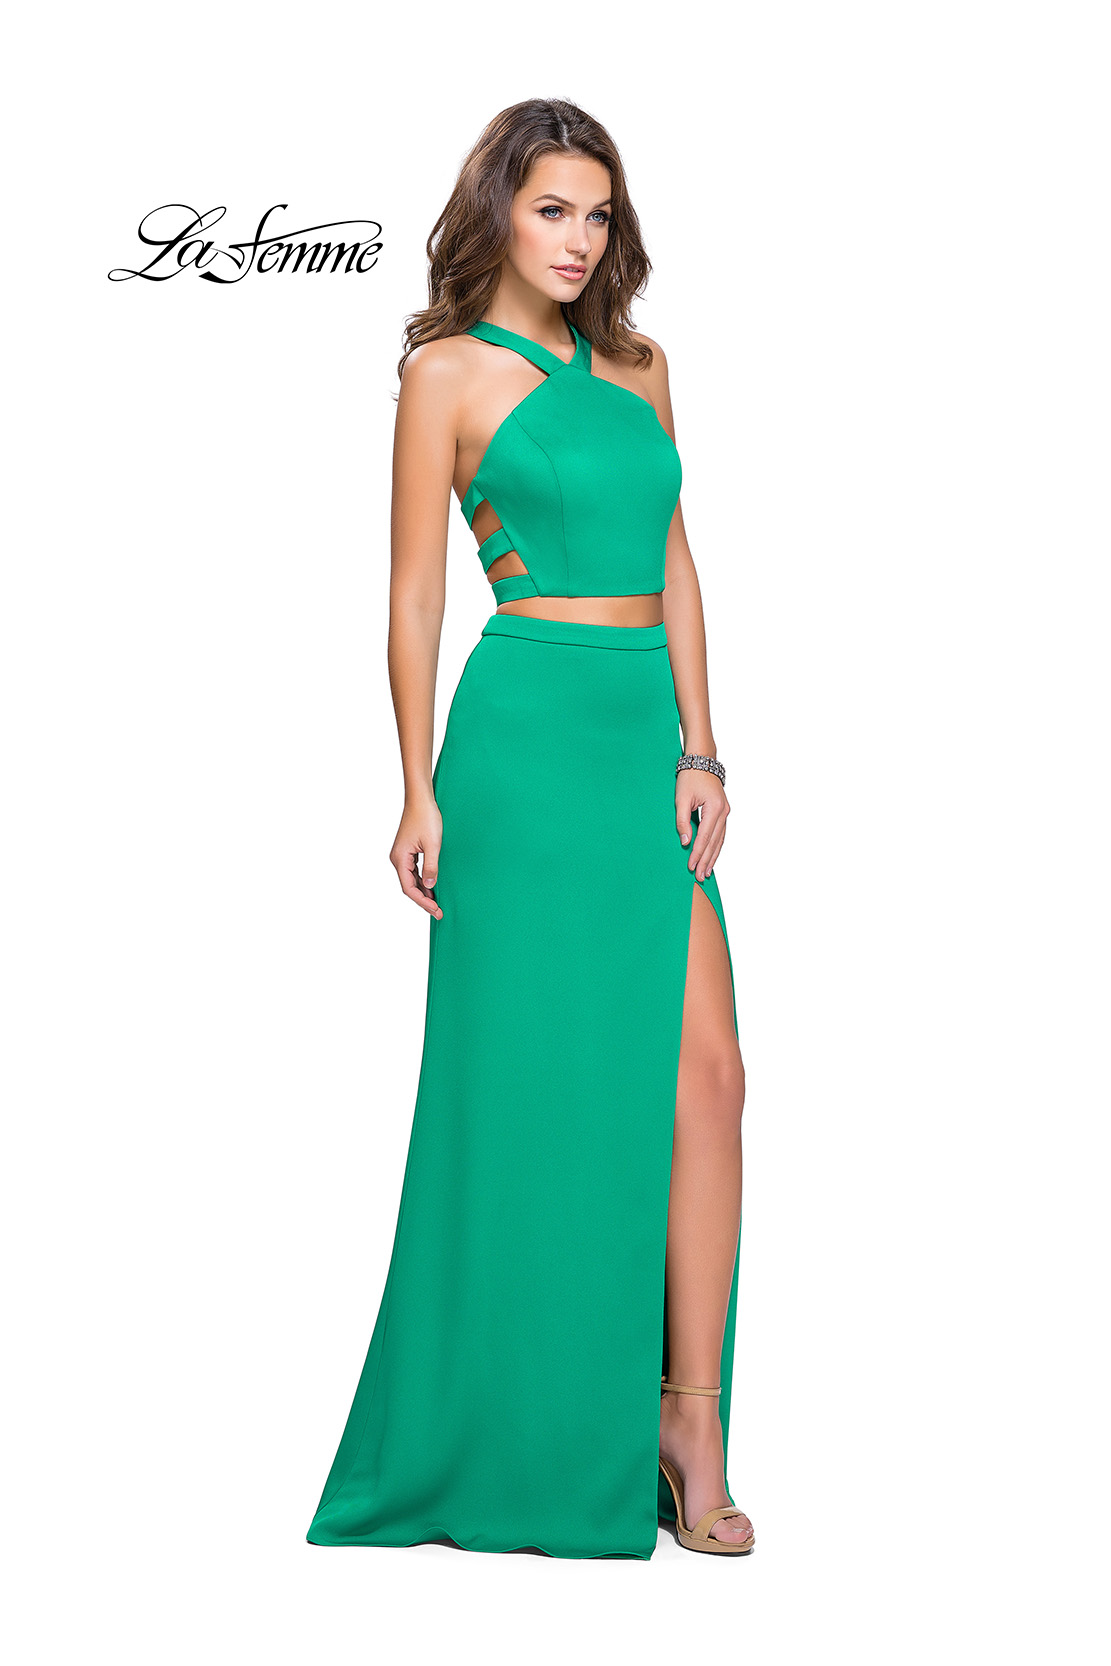 Two Piece Green Prom Dress with Strappy Back by La Femme